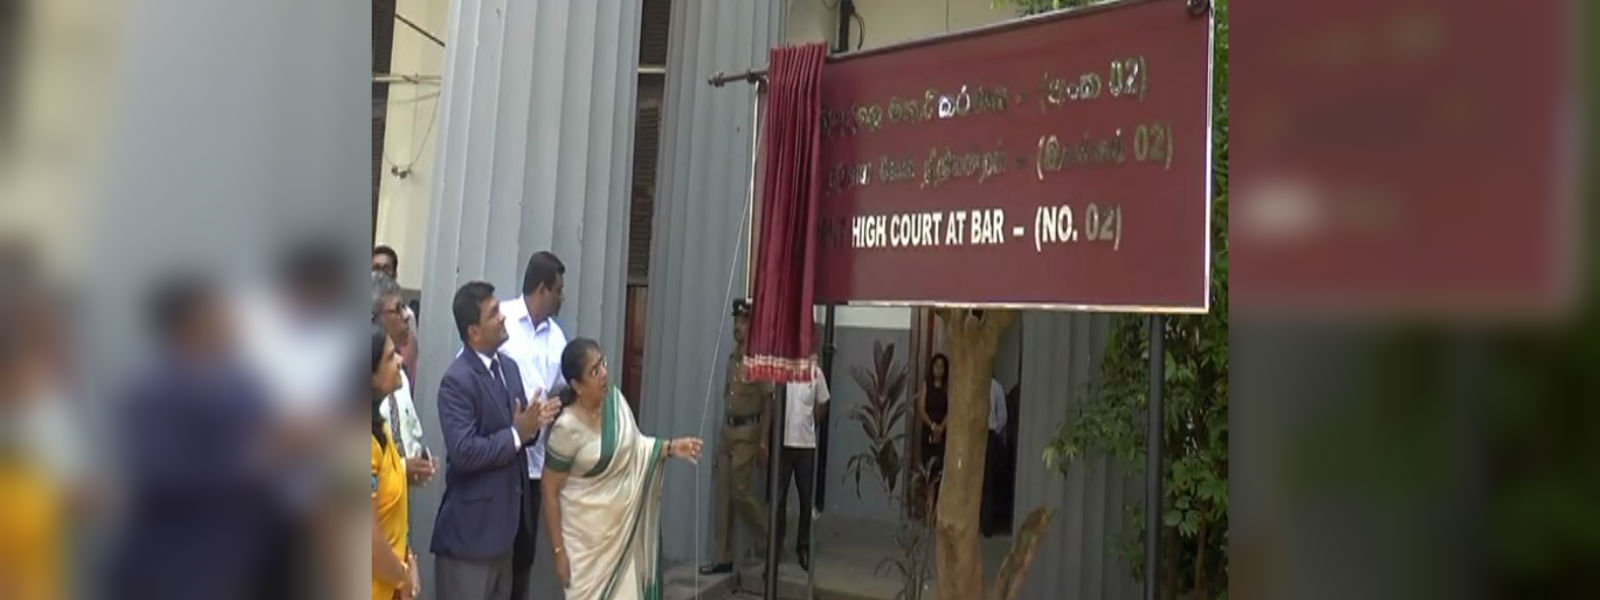 2nd permanent High Court Trial at bar opened today